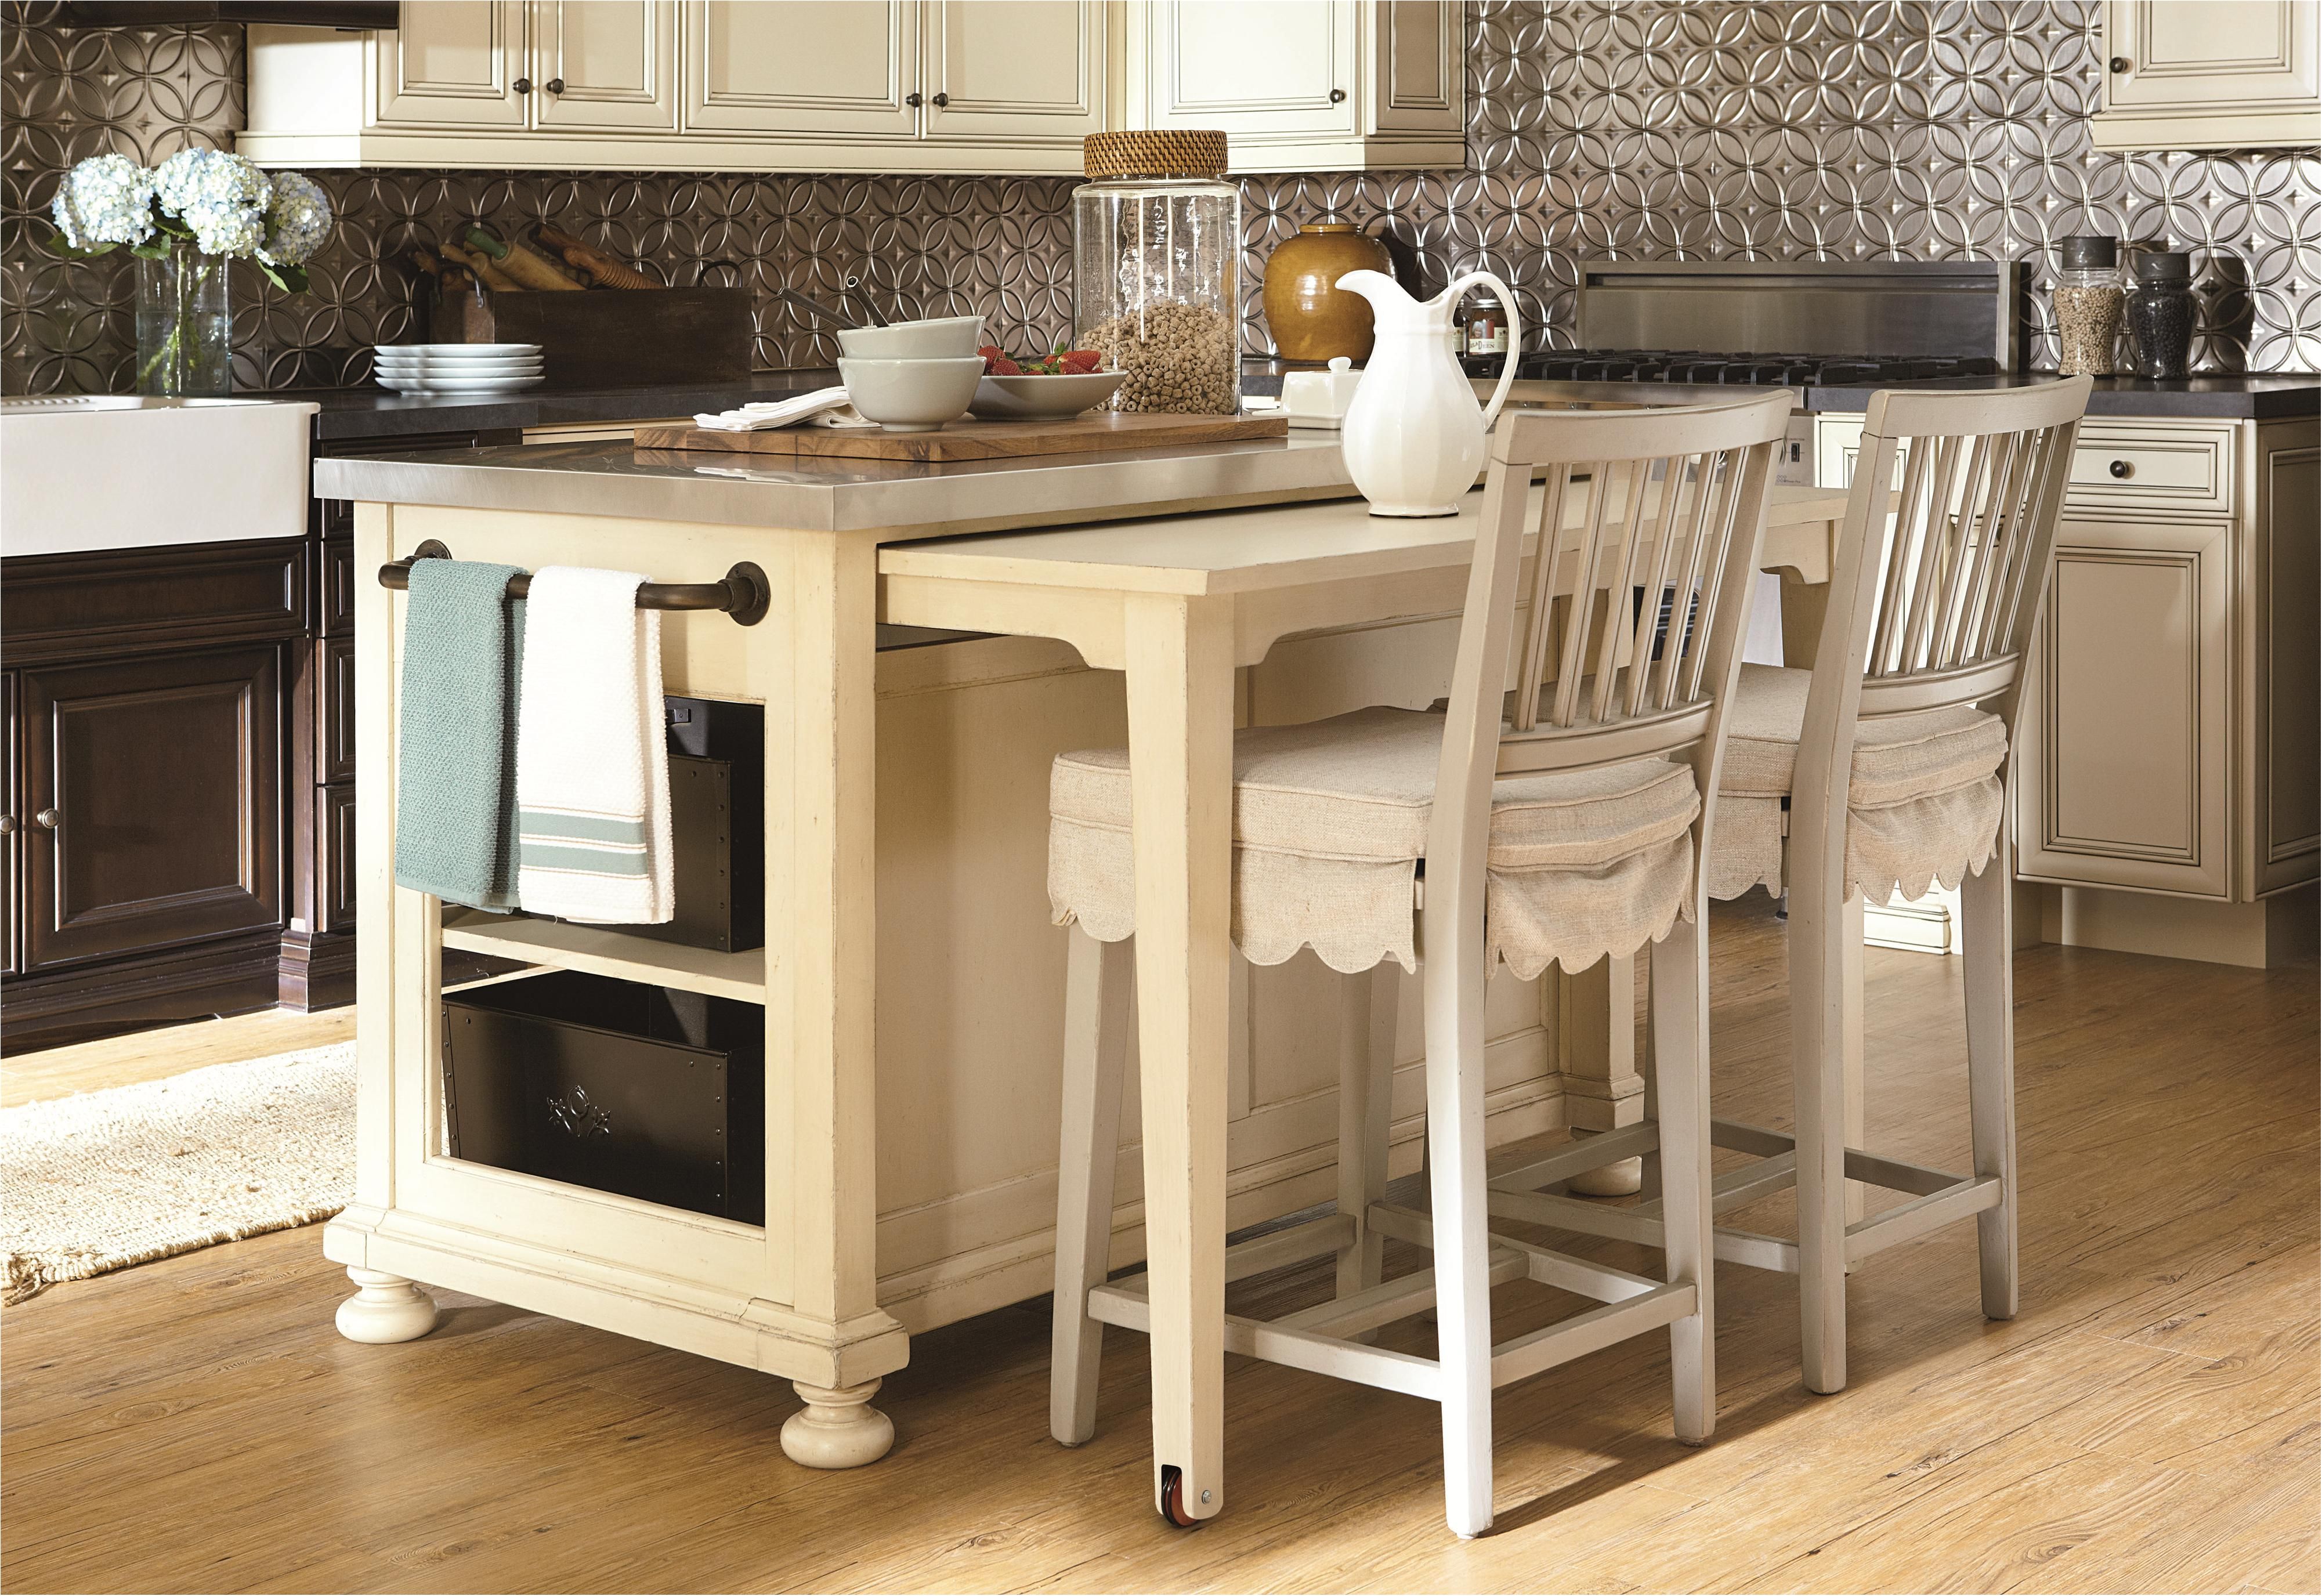 mobile kitchen island with bar stools